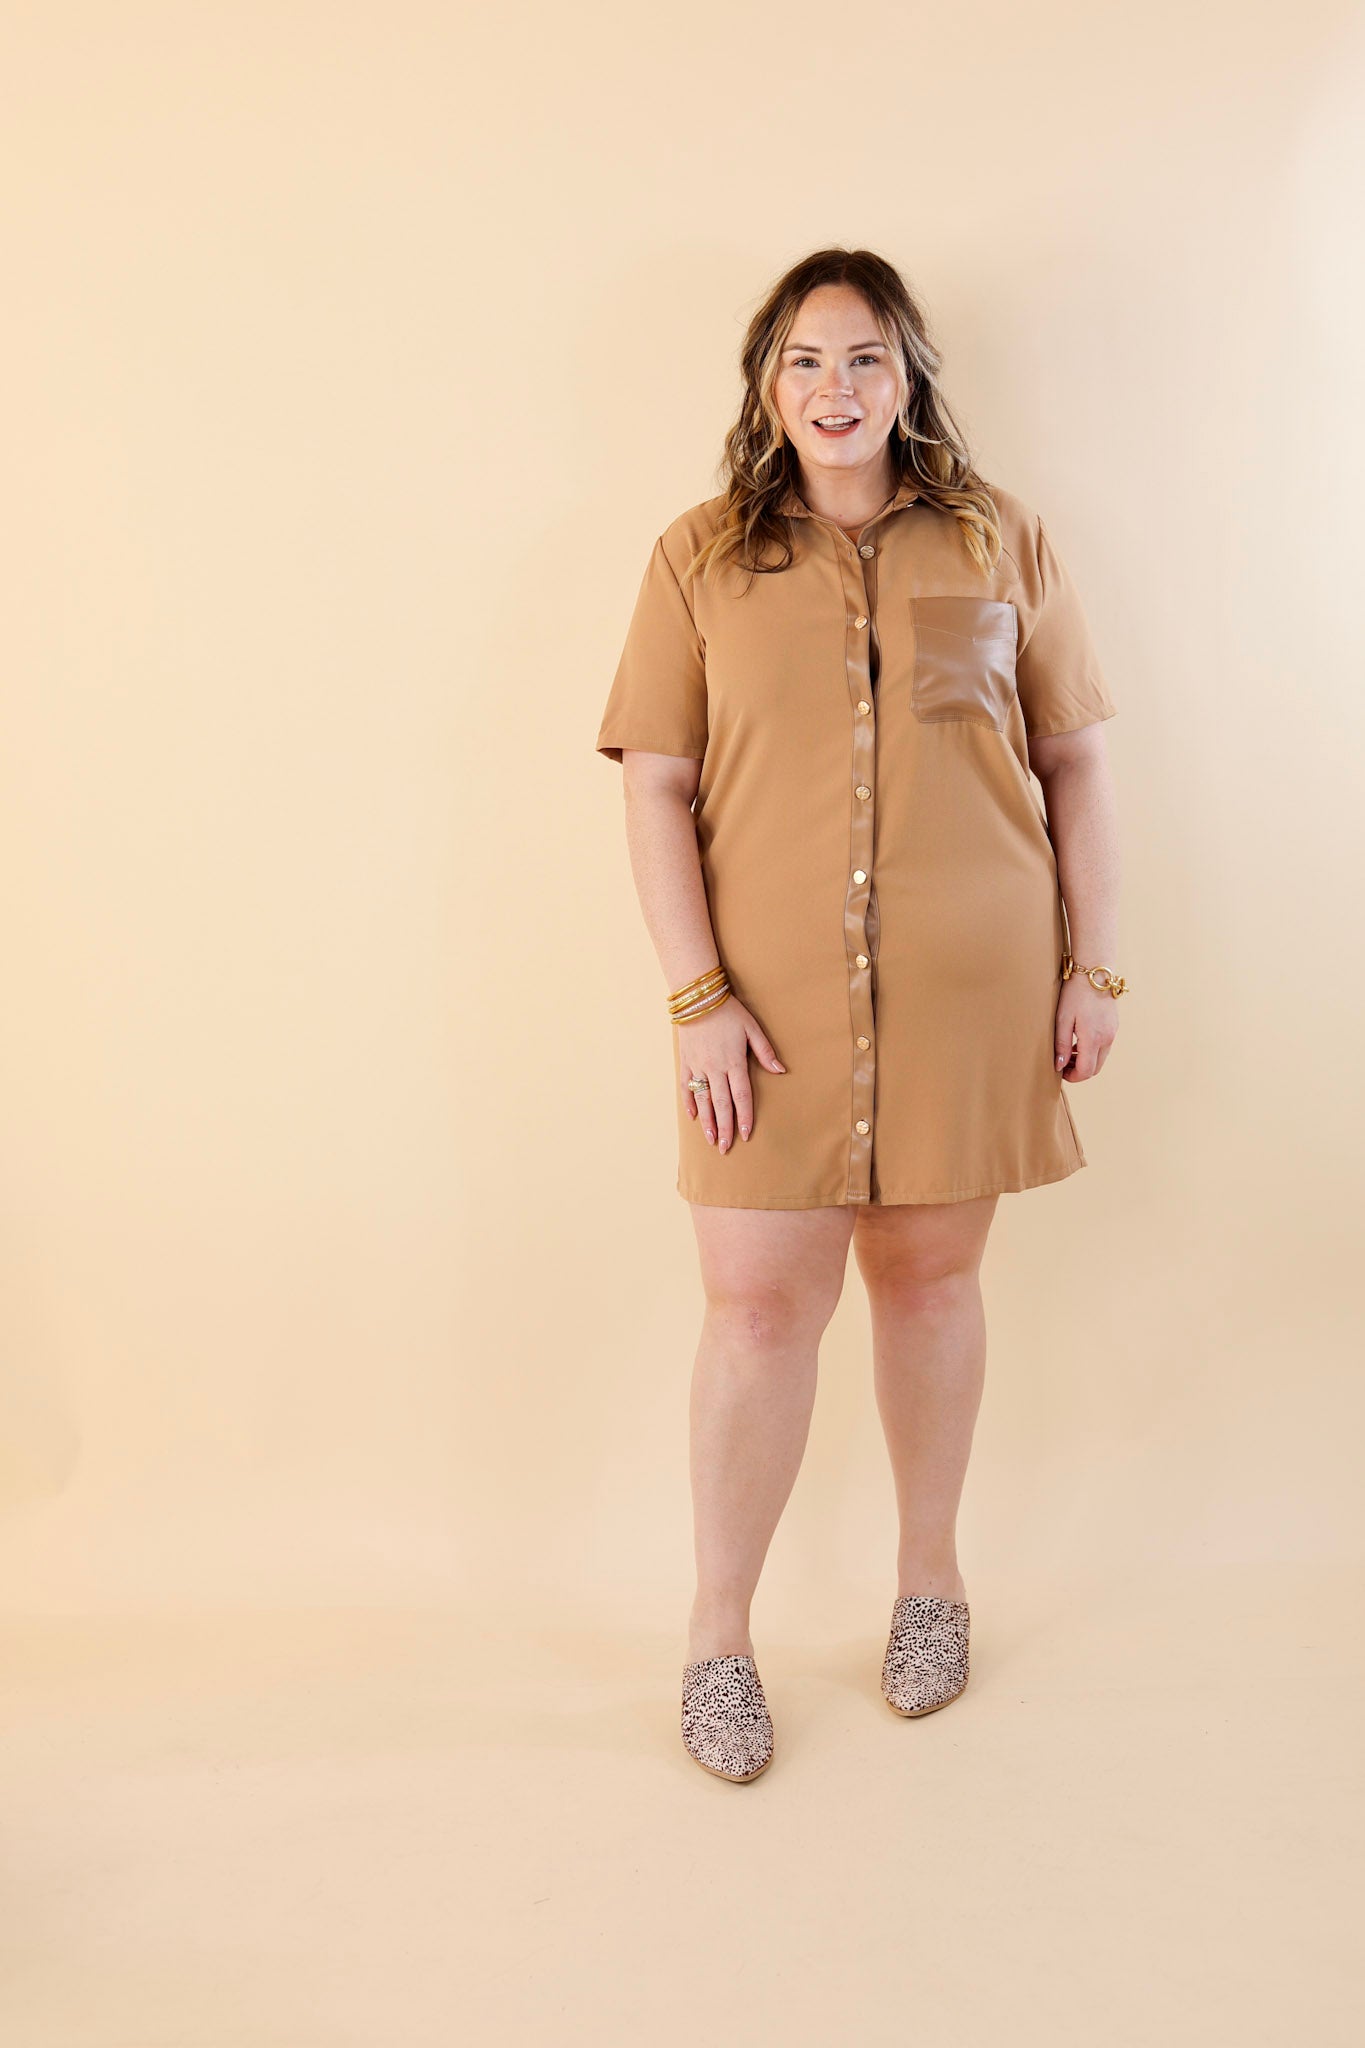 Put Your Records On Button Up Faux Leather Trim Dress in Camel Brown - Giddy Up Glamour Boutique